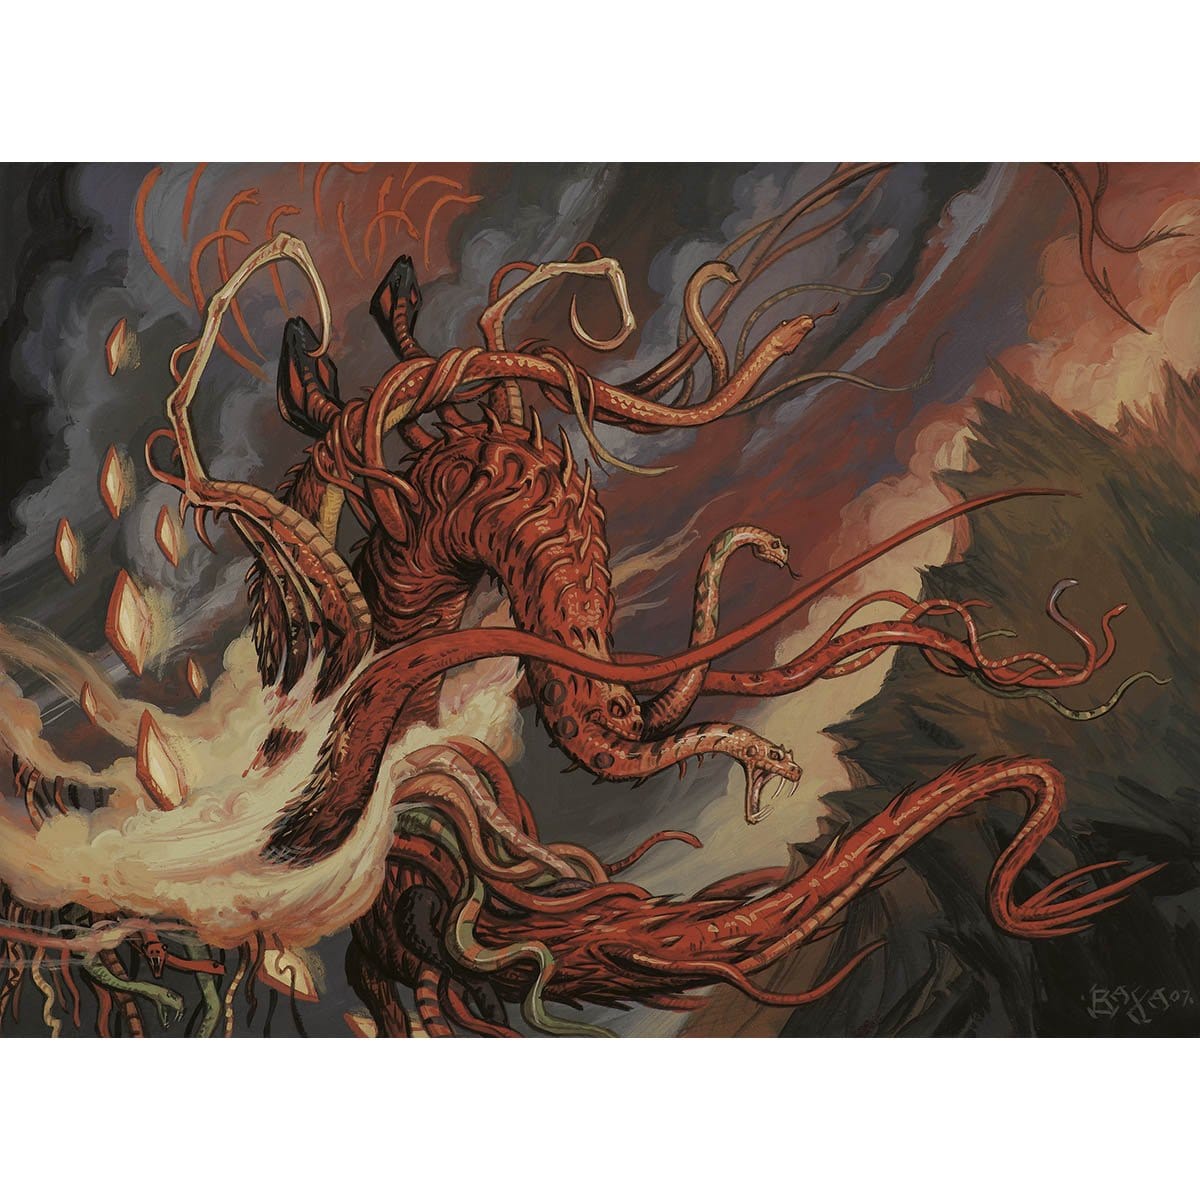 Hateflayer Print - Print - Original Magic Art - Accessories for Magic the Gathering and other card games